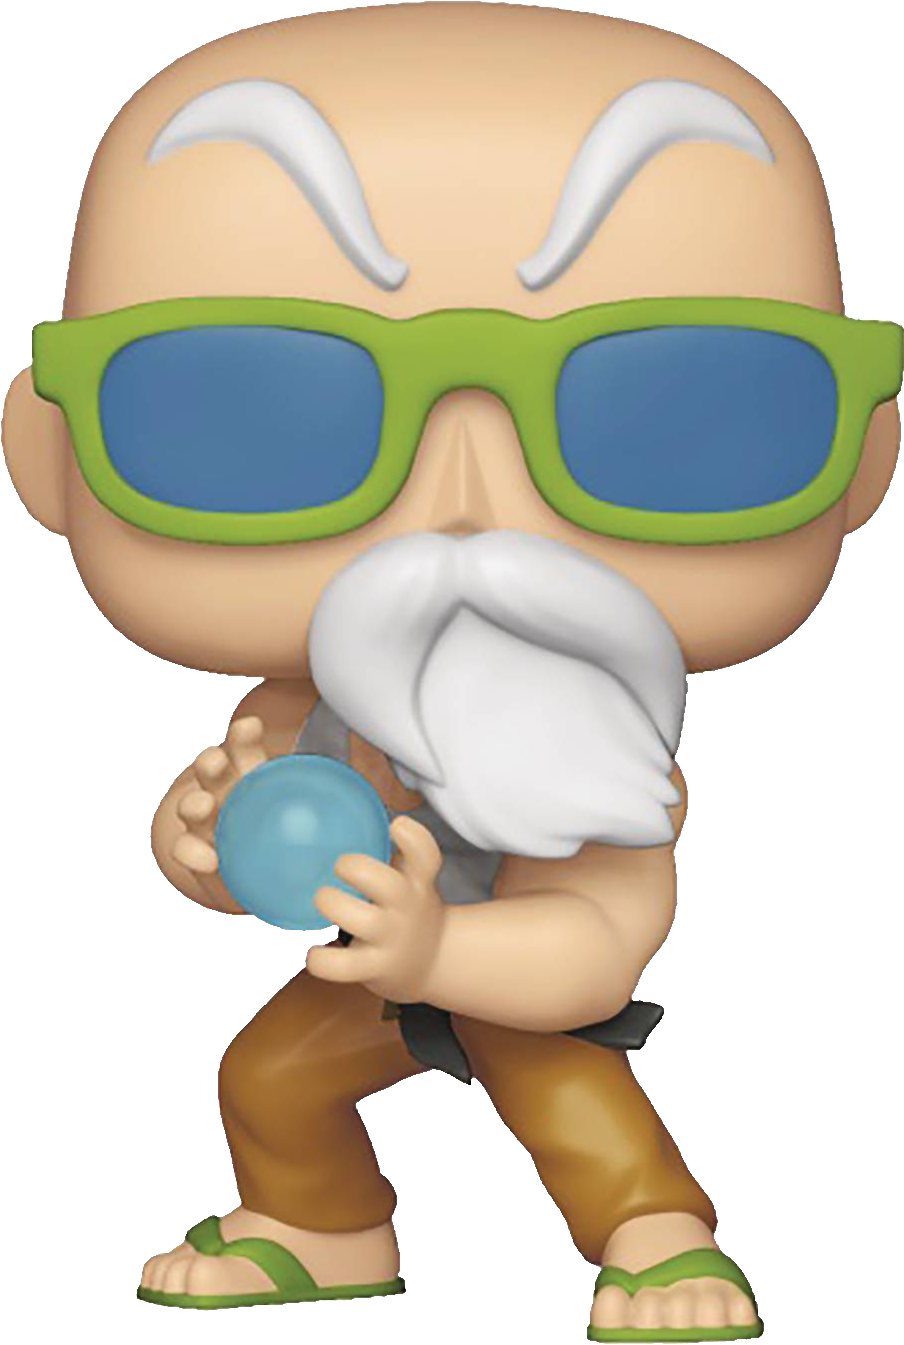 Animated Character Holding Crystal Ball Figurine PNG